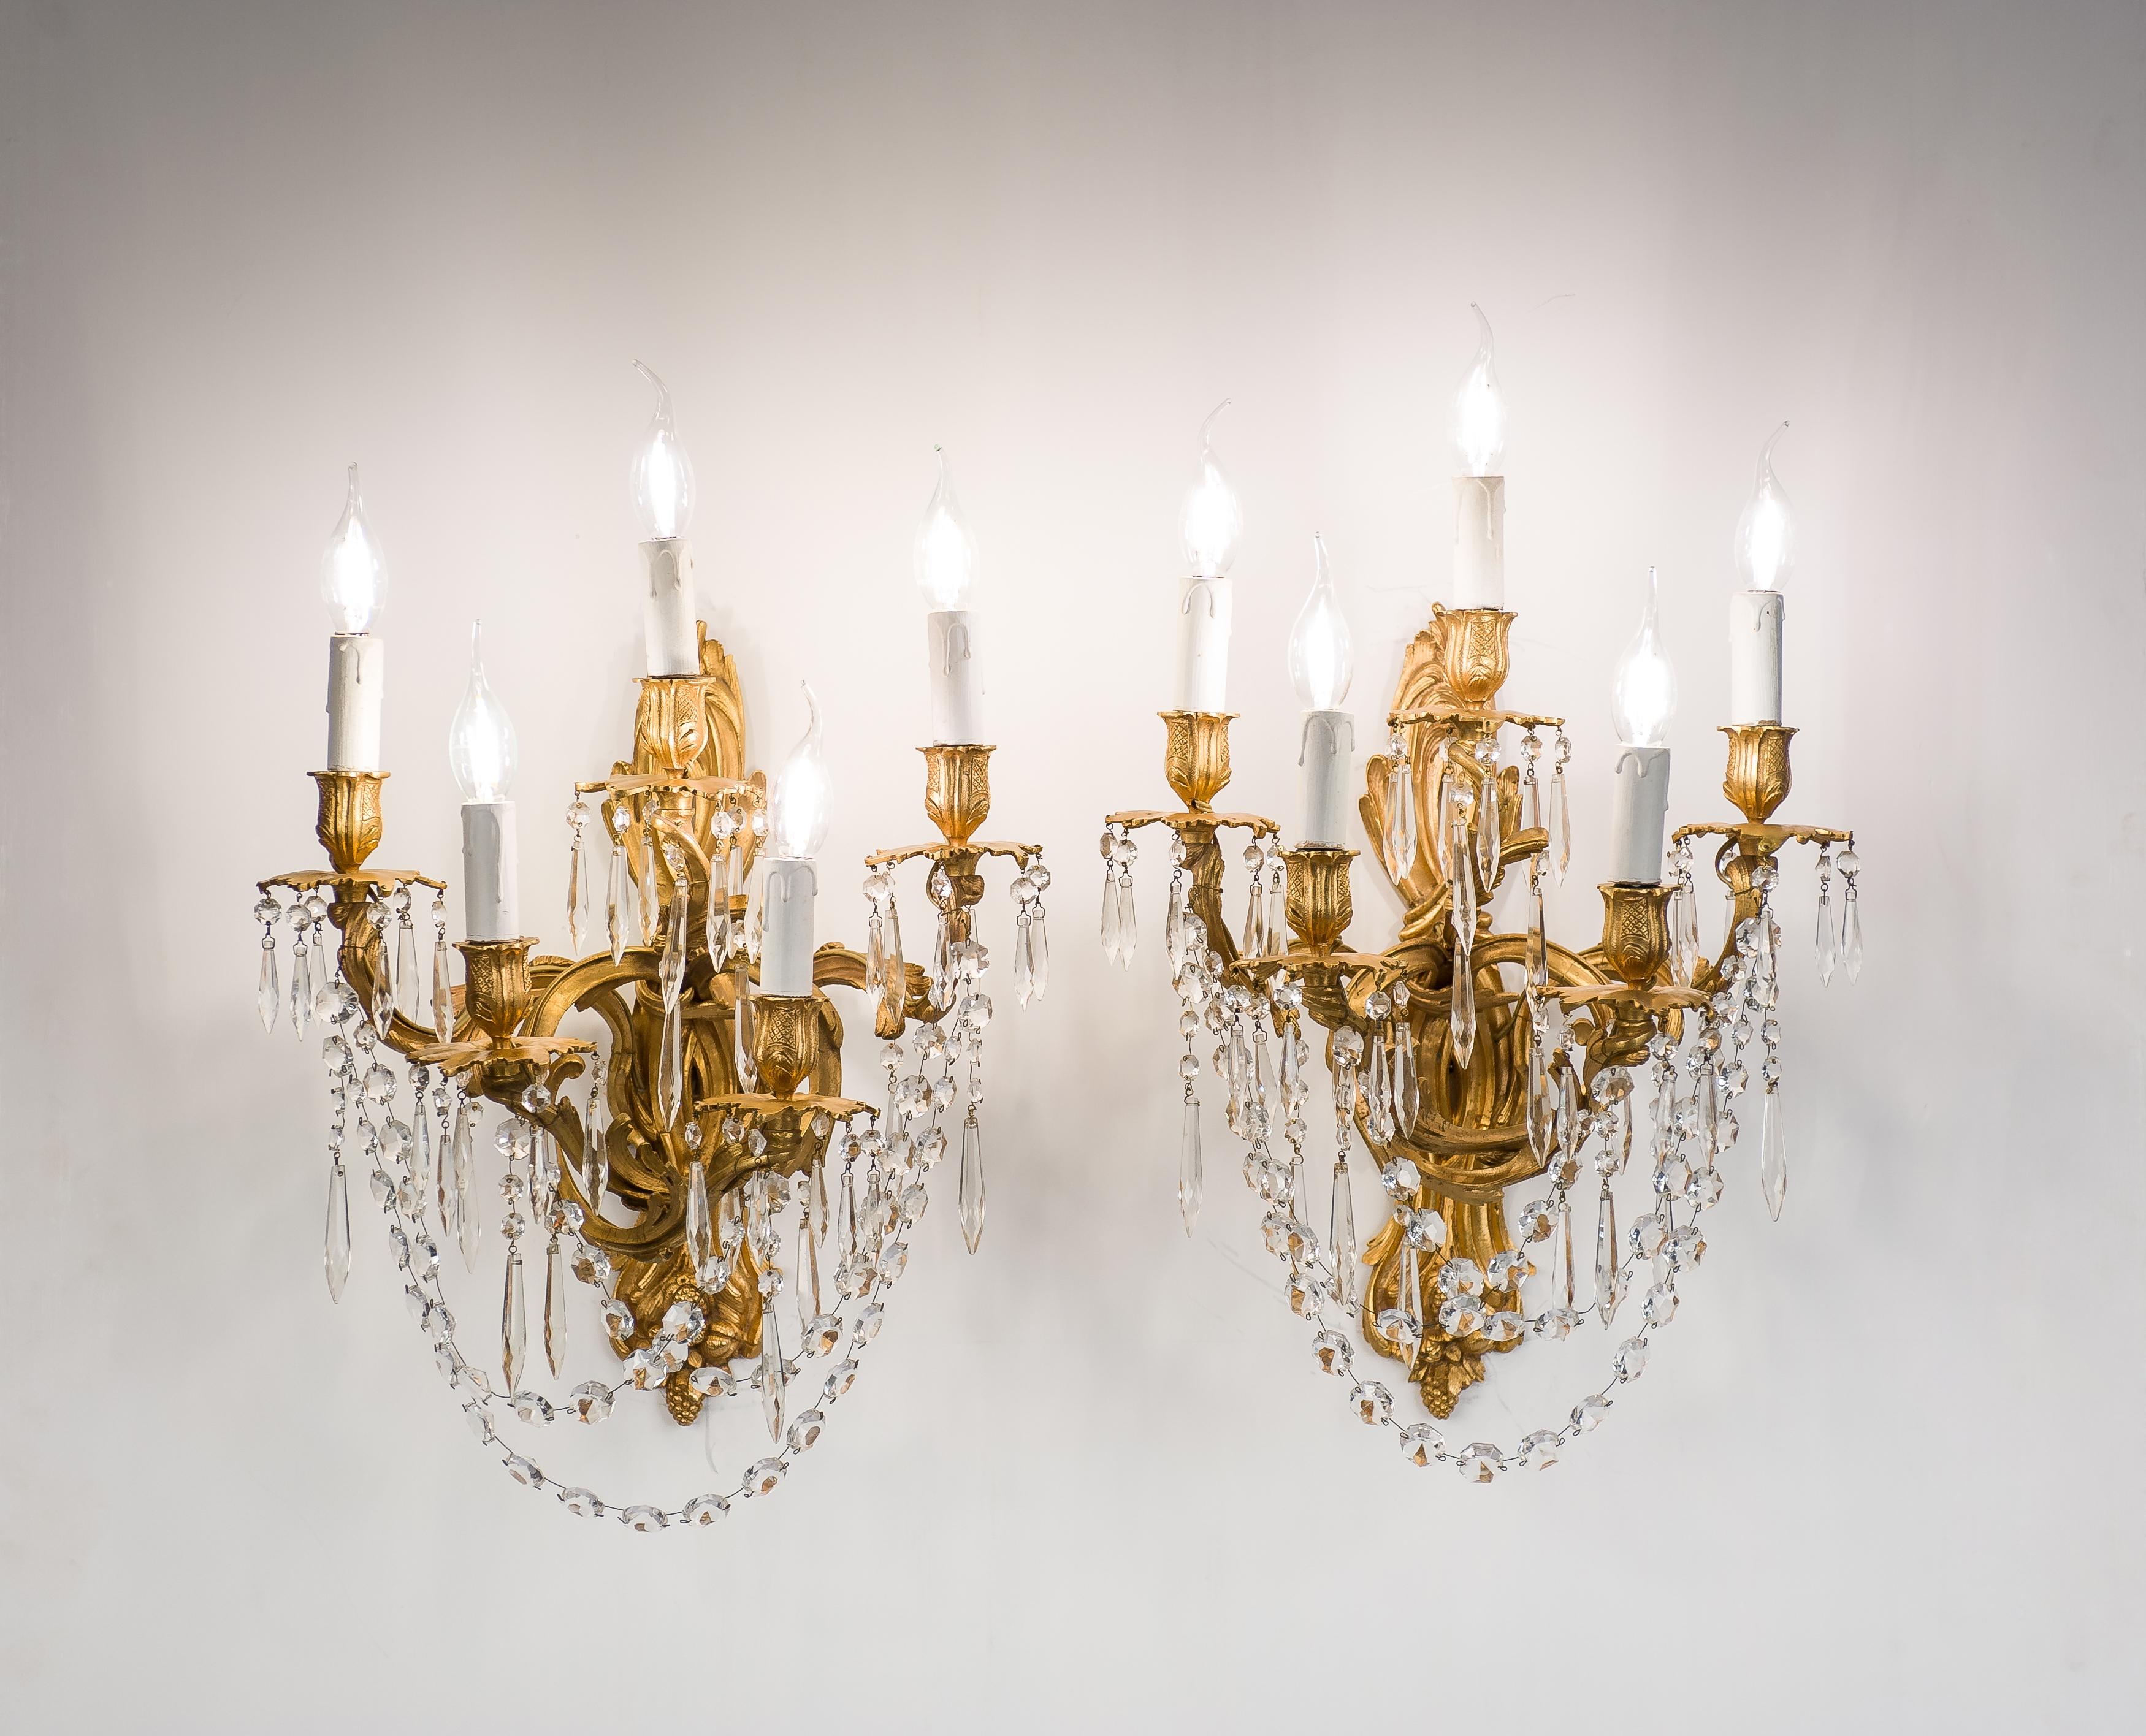 On offer here is a beautiful pair of late 19th-century French bronze fire-gilt and crystal-hung sconces. The large cast bronze sconces each feature five scrolled arms and are decorated with acanthus, scrolls, and floral themes. The asymmetrical